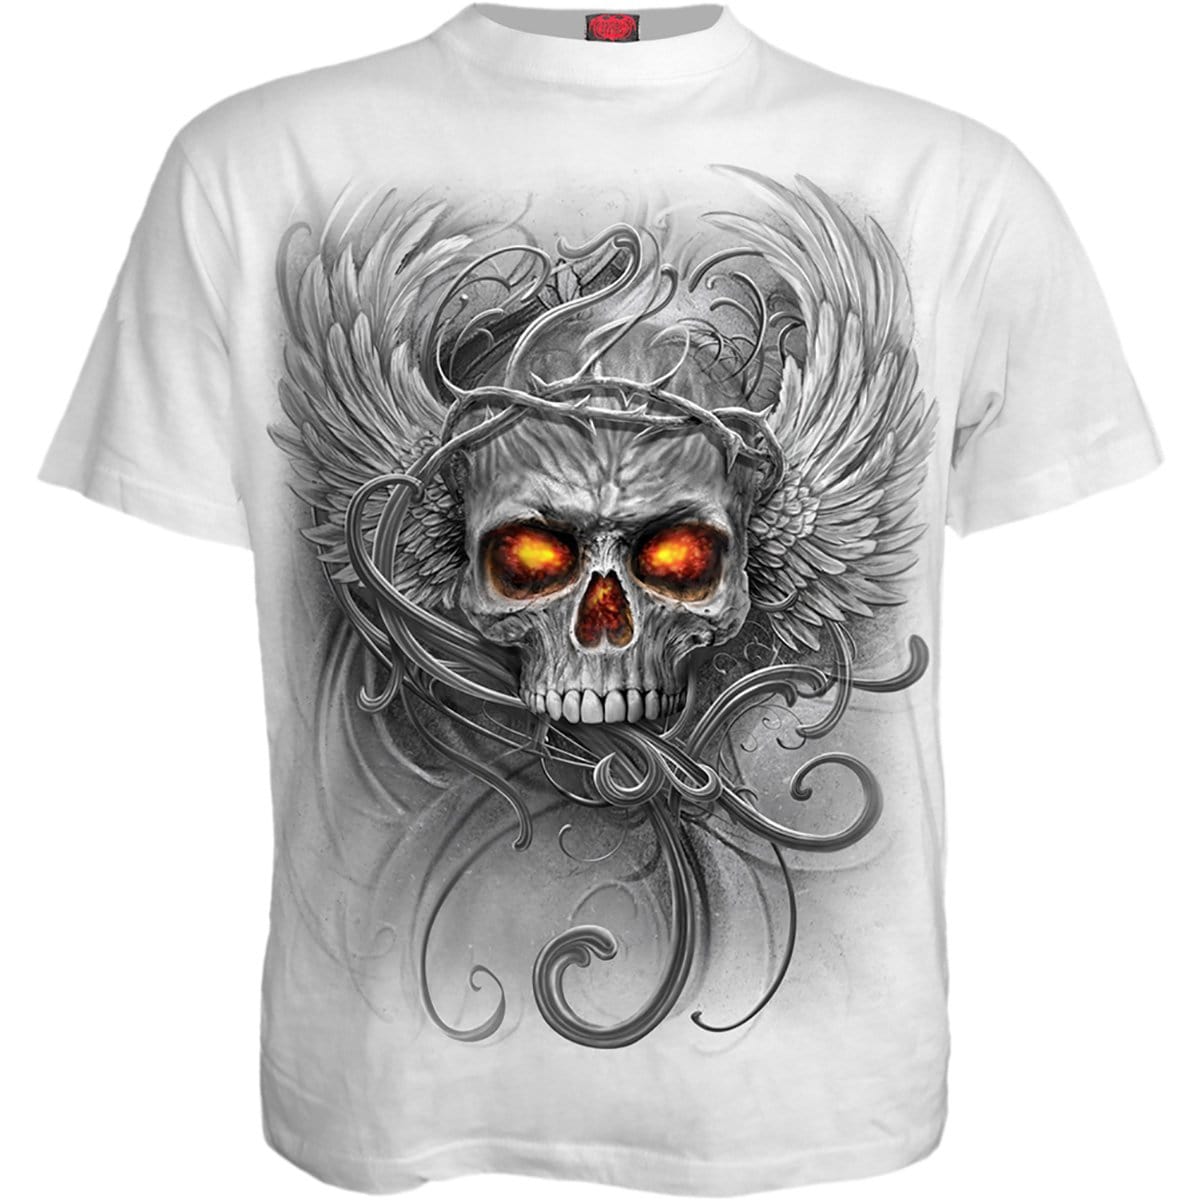 ROOTS OF HELL - T-Shirt White - Spiral USA